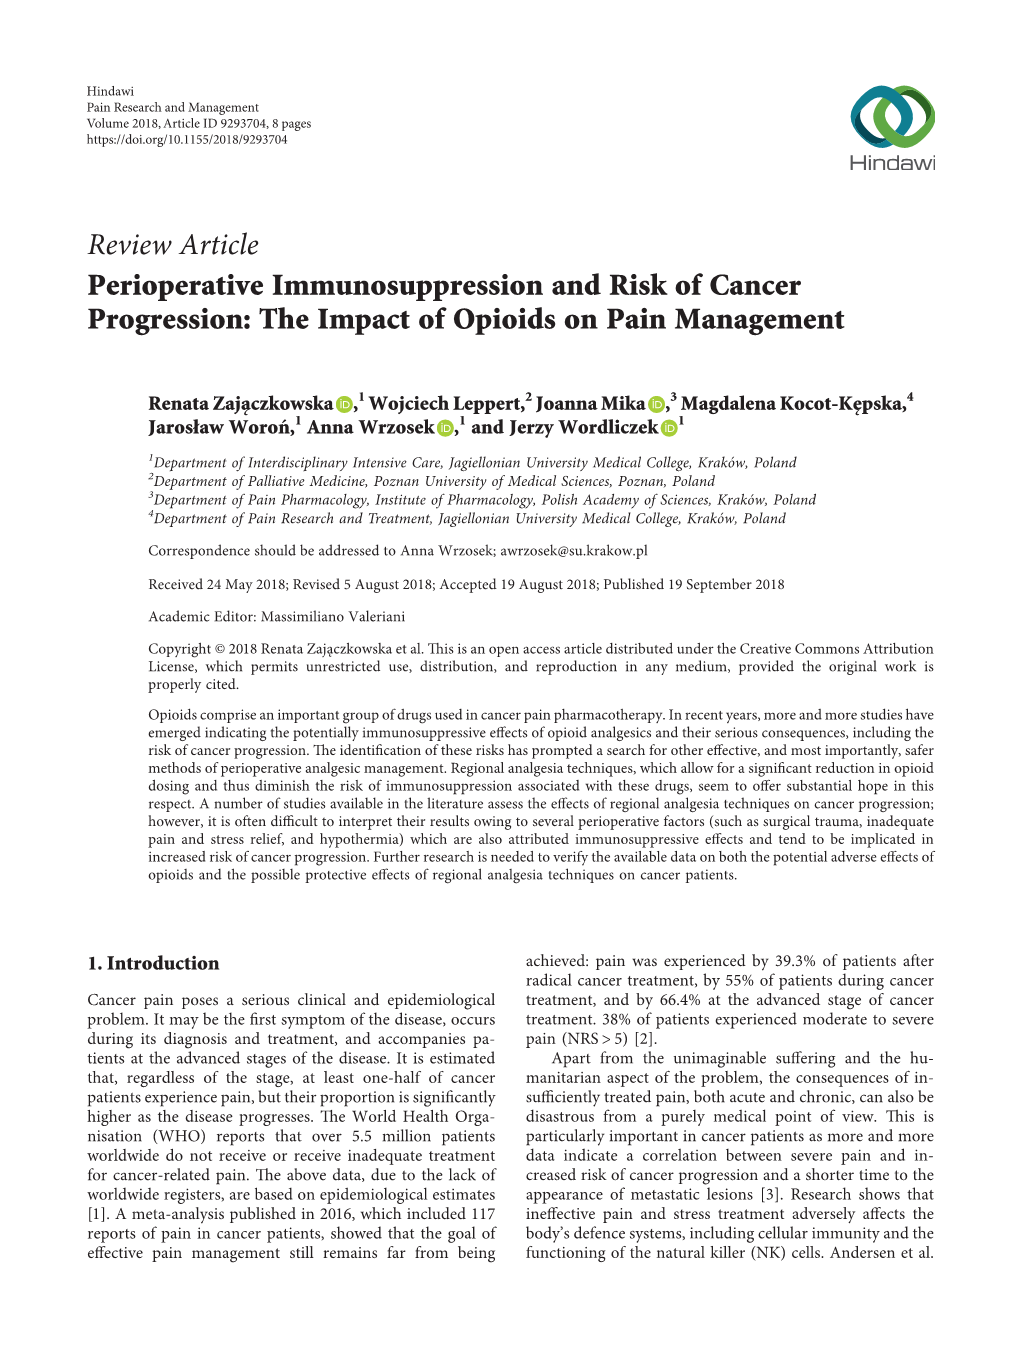 Perioperative Immunosuppression and Risk of Cancer Progression: the Impact of Opioids on Pain Management